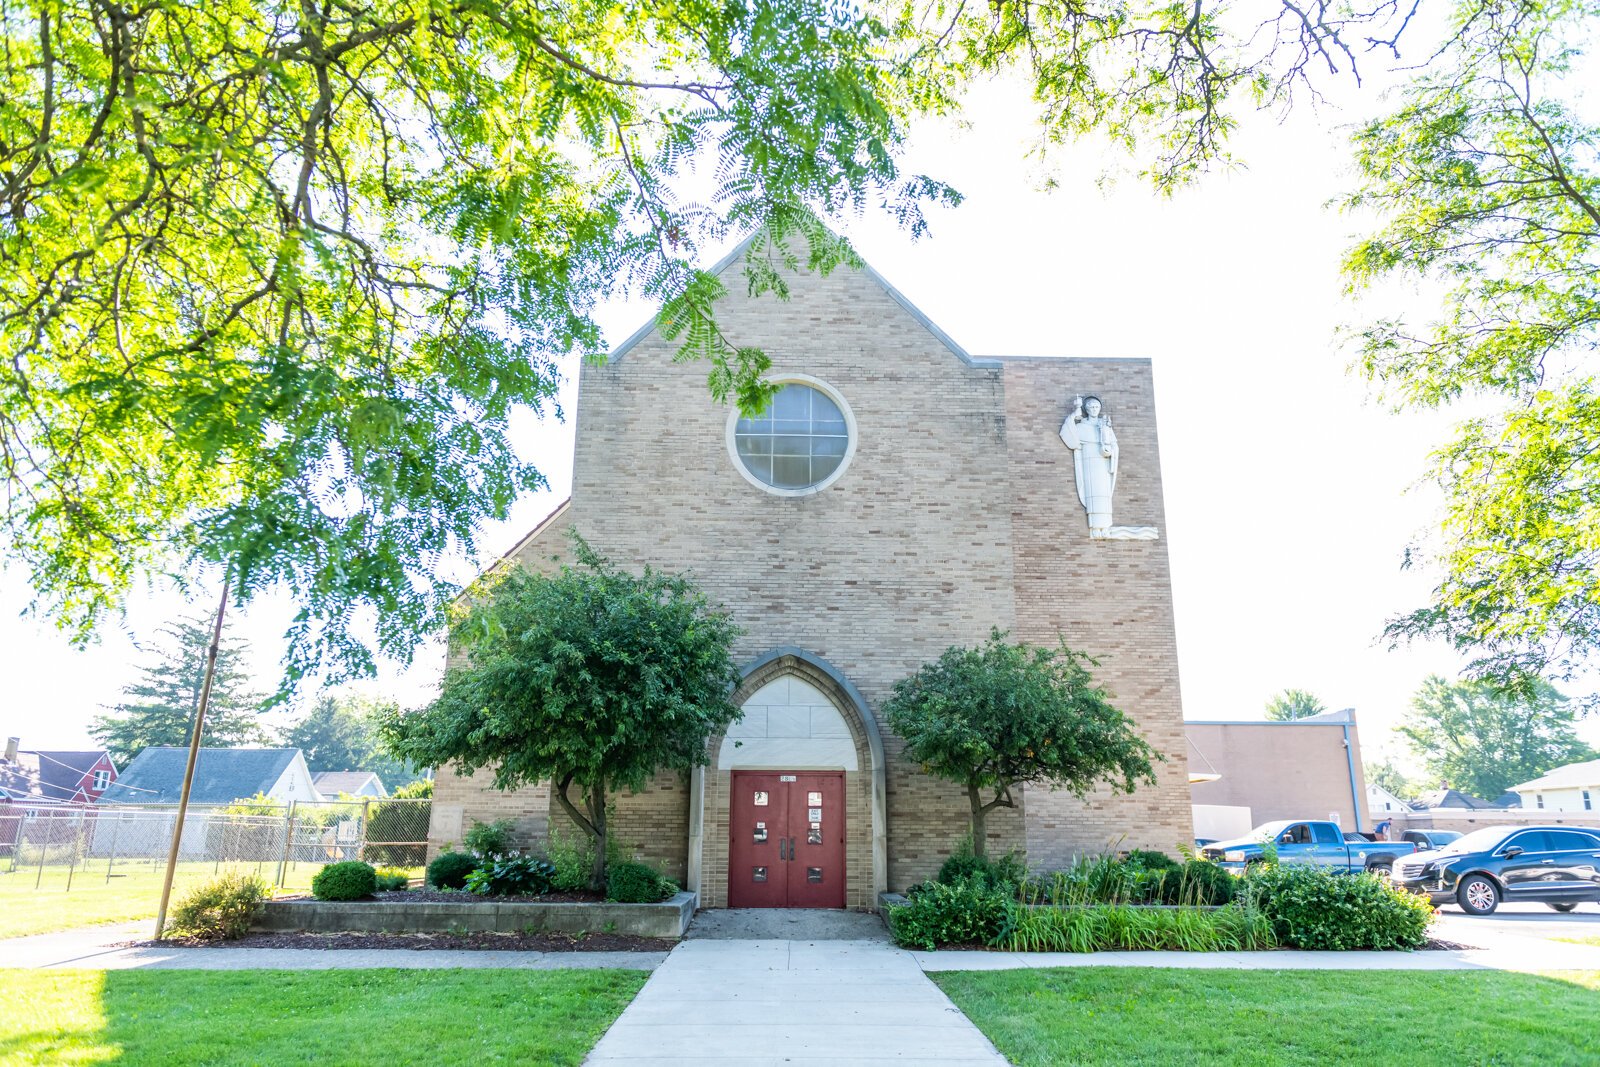 The church at Vincent Village, which has been converted to offices and conference rooms.